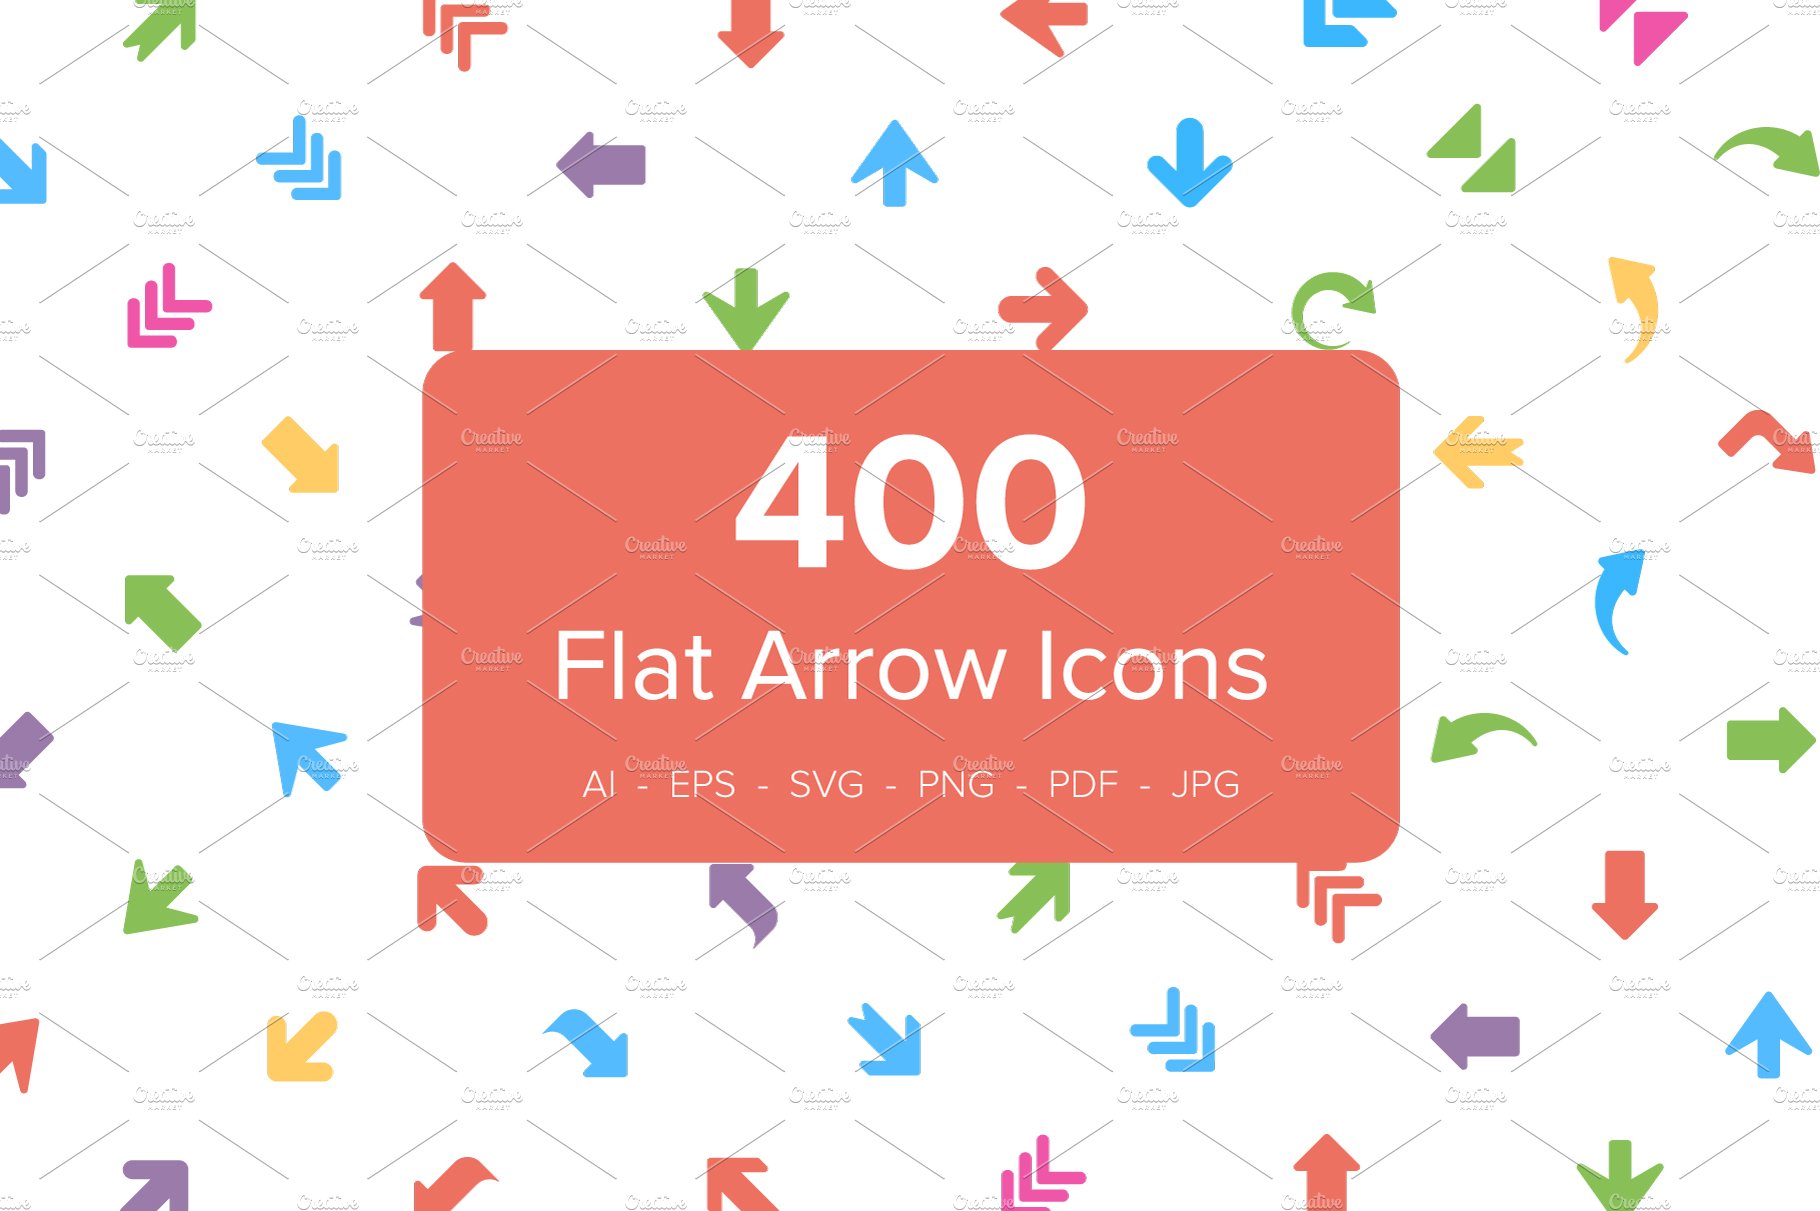 400 Flat Arrows Vector Icons cover image.